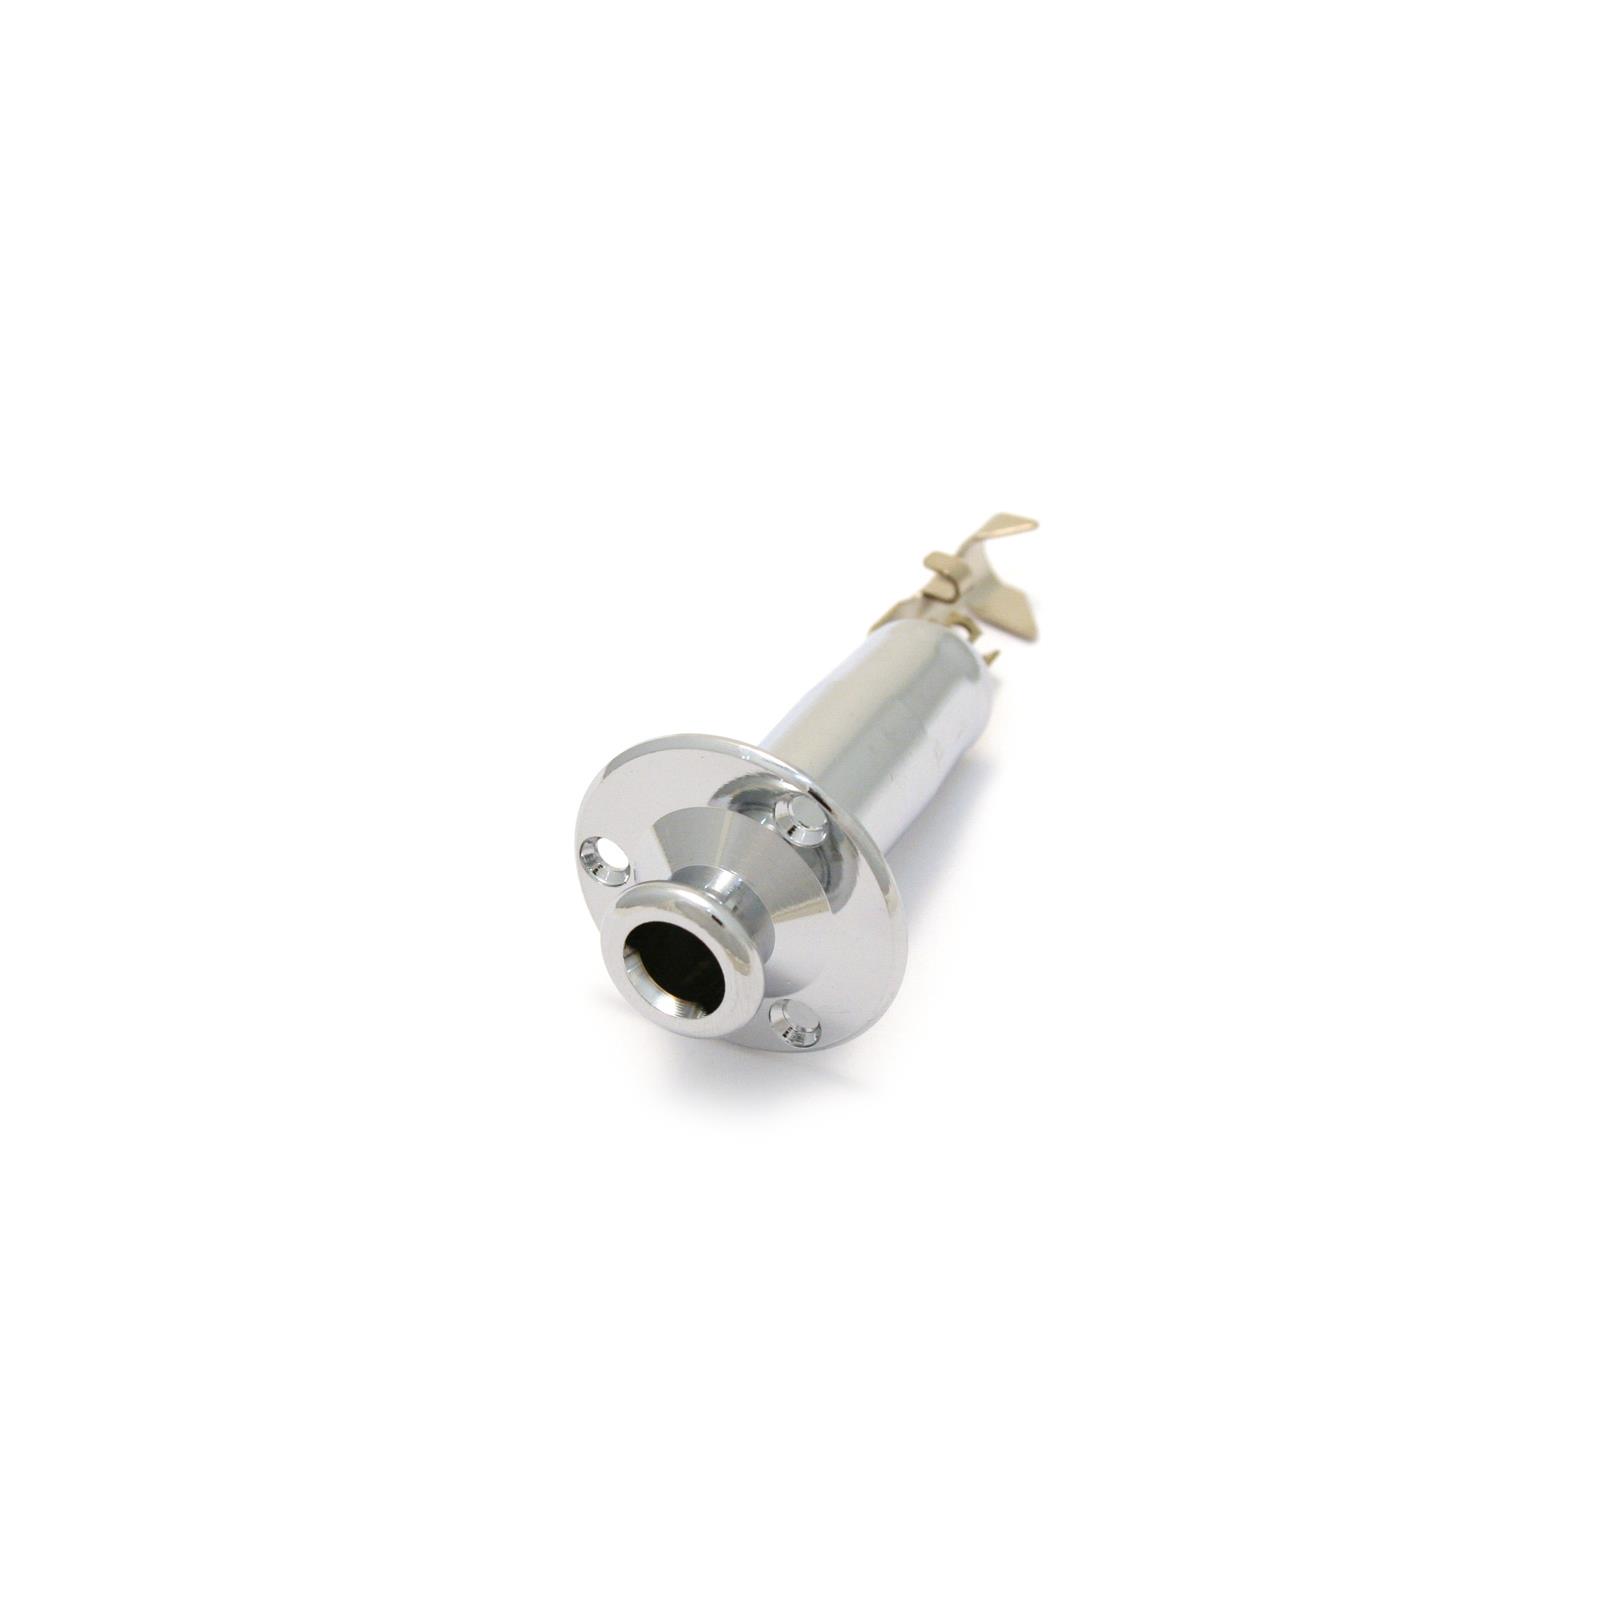 All Parts Chrome Acoustic End Pin Jack